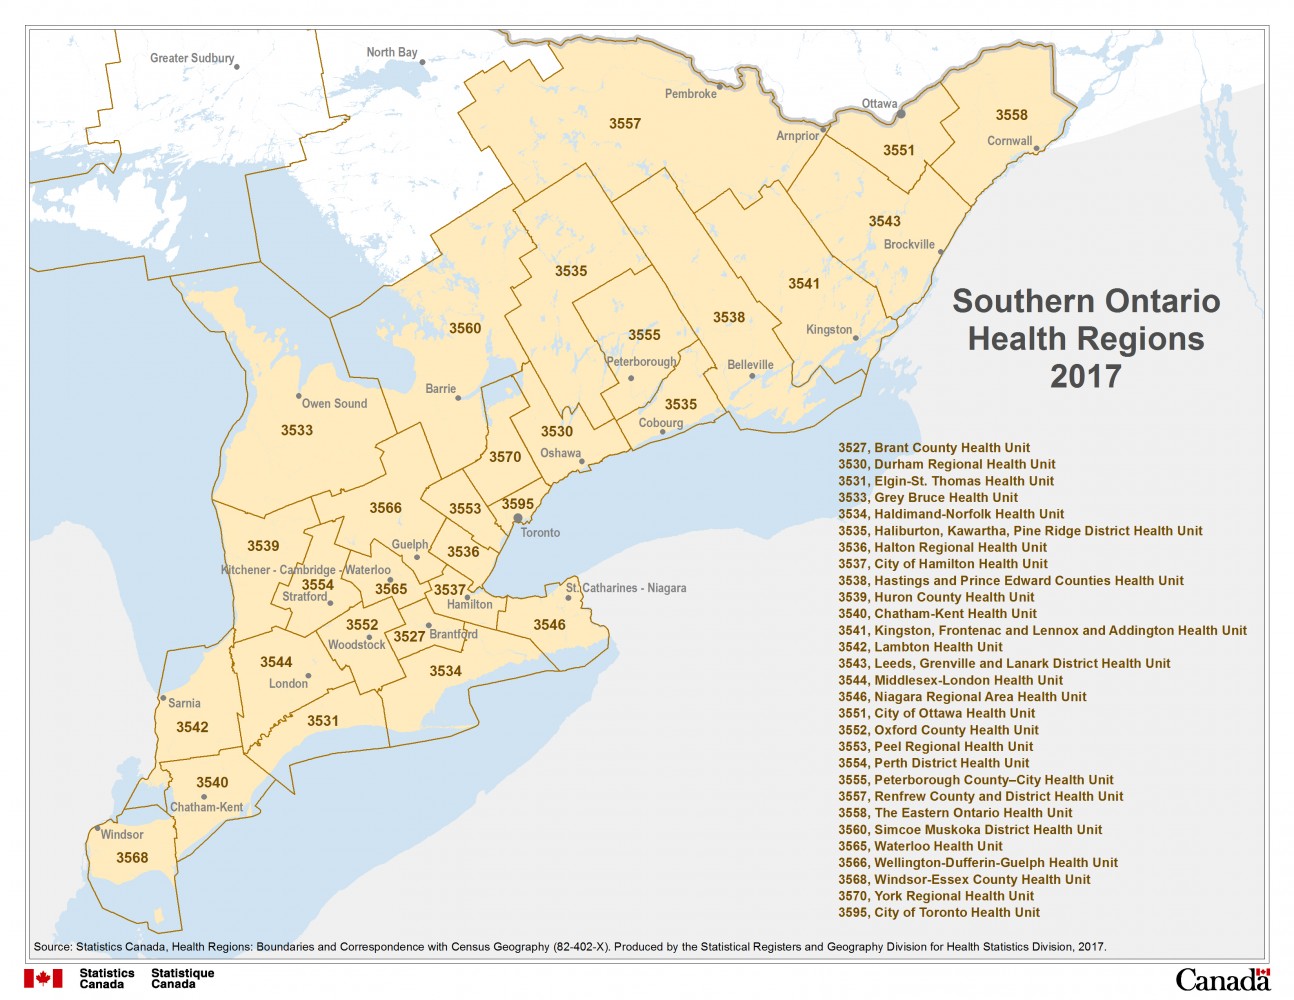 Peel Region fights for public health independence